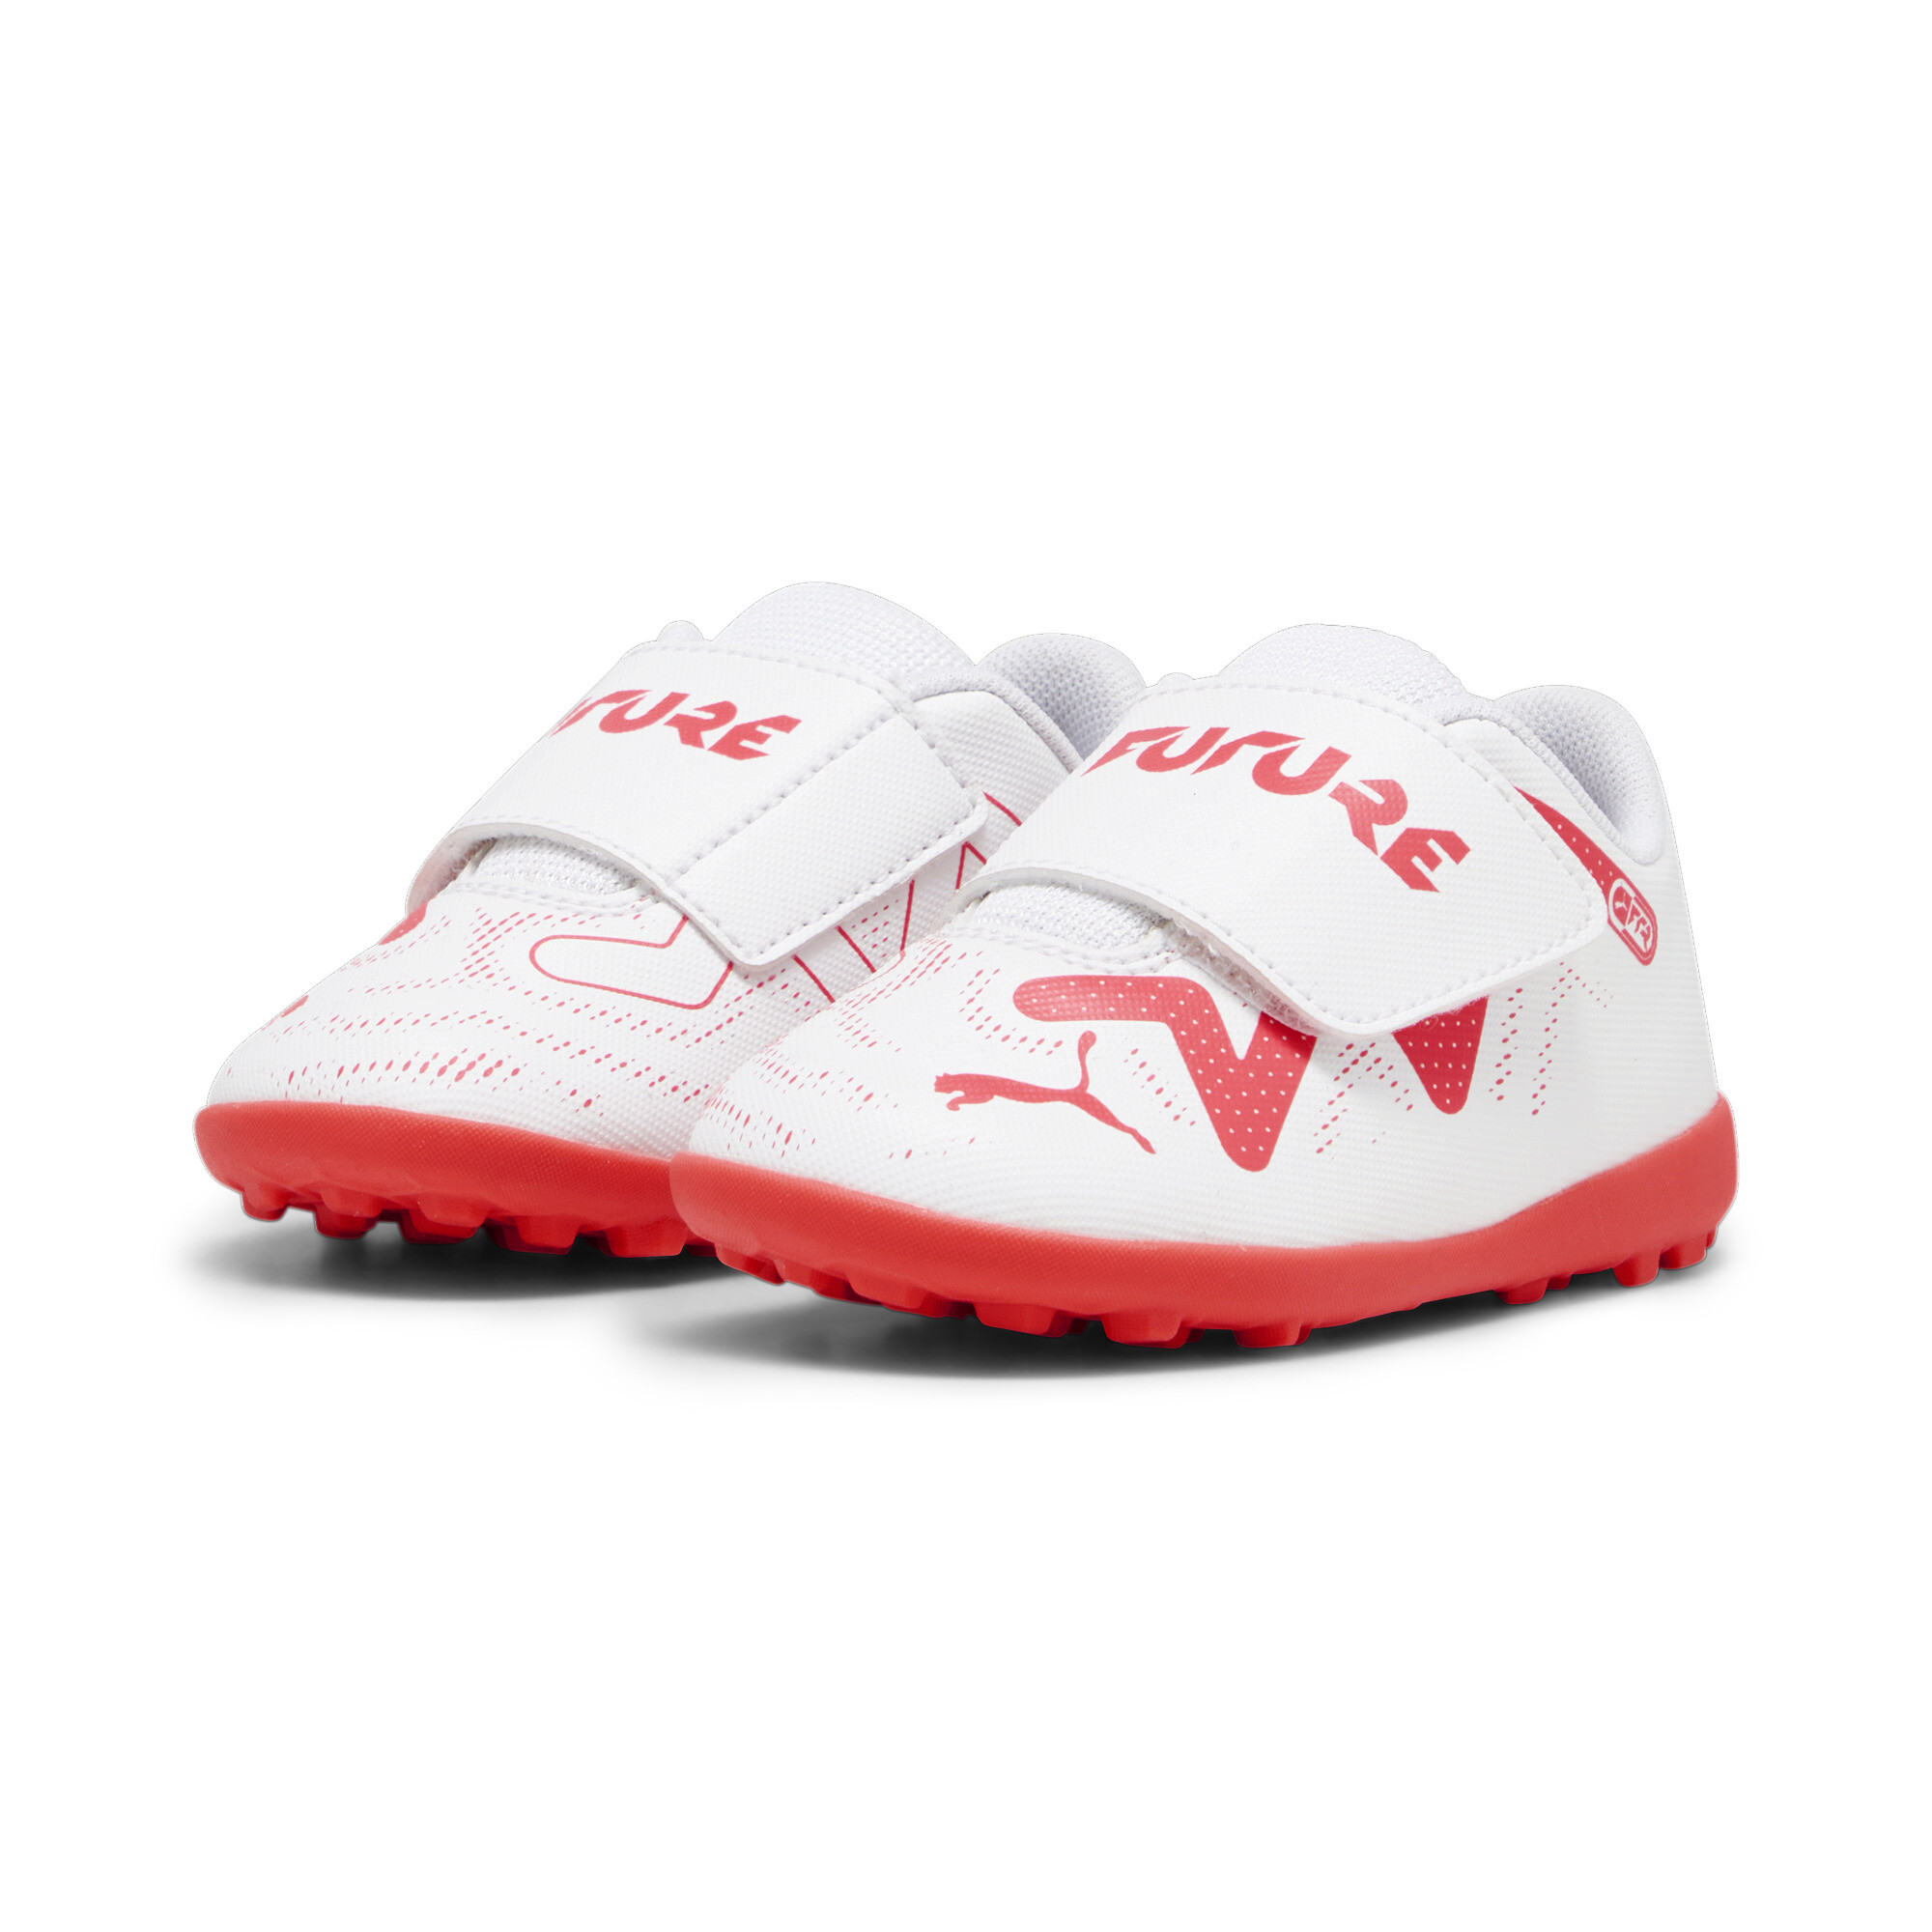 Kids' PUMA FUTURE PLAY TT Toddlers' Football Boots In White, Size EU 23